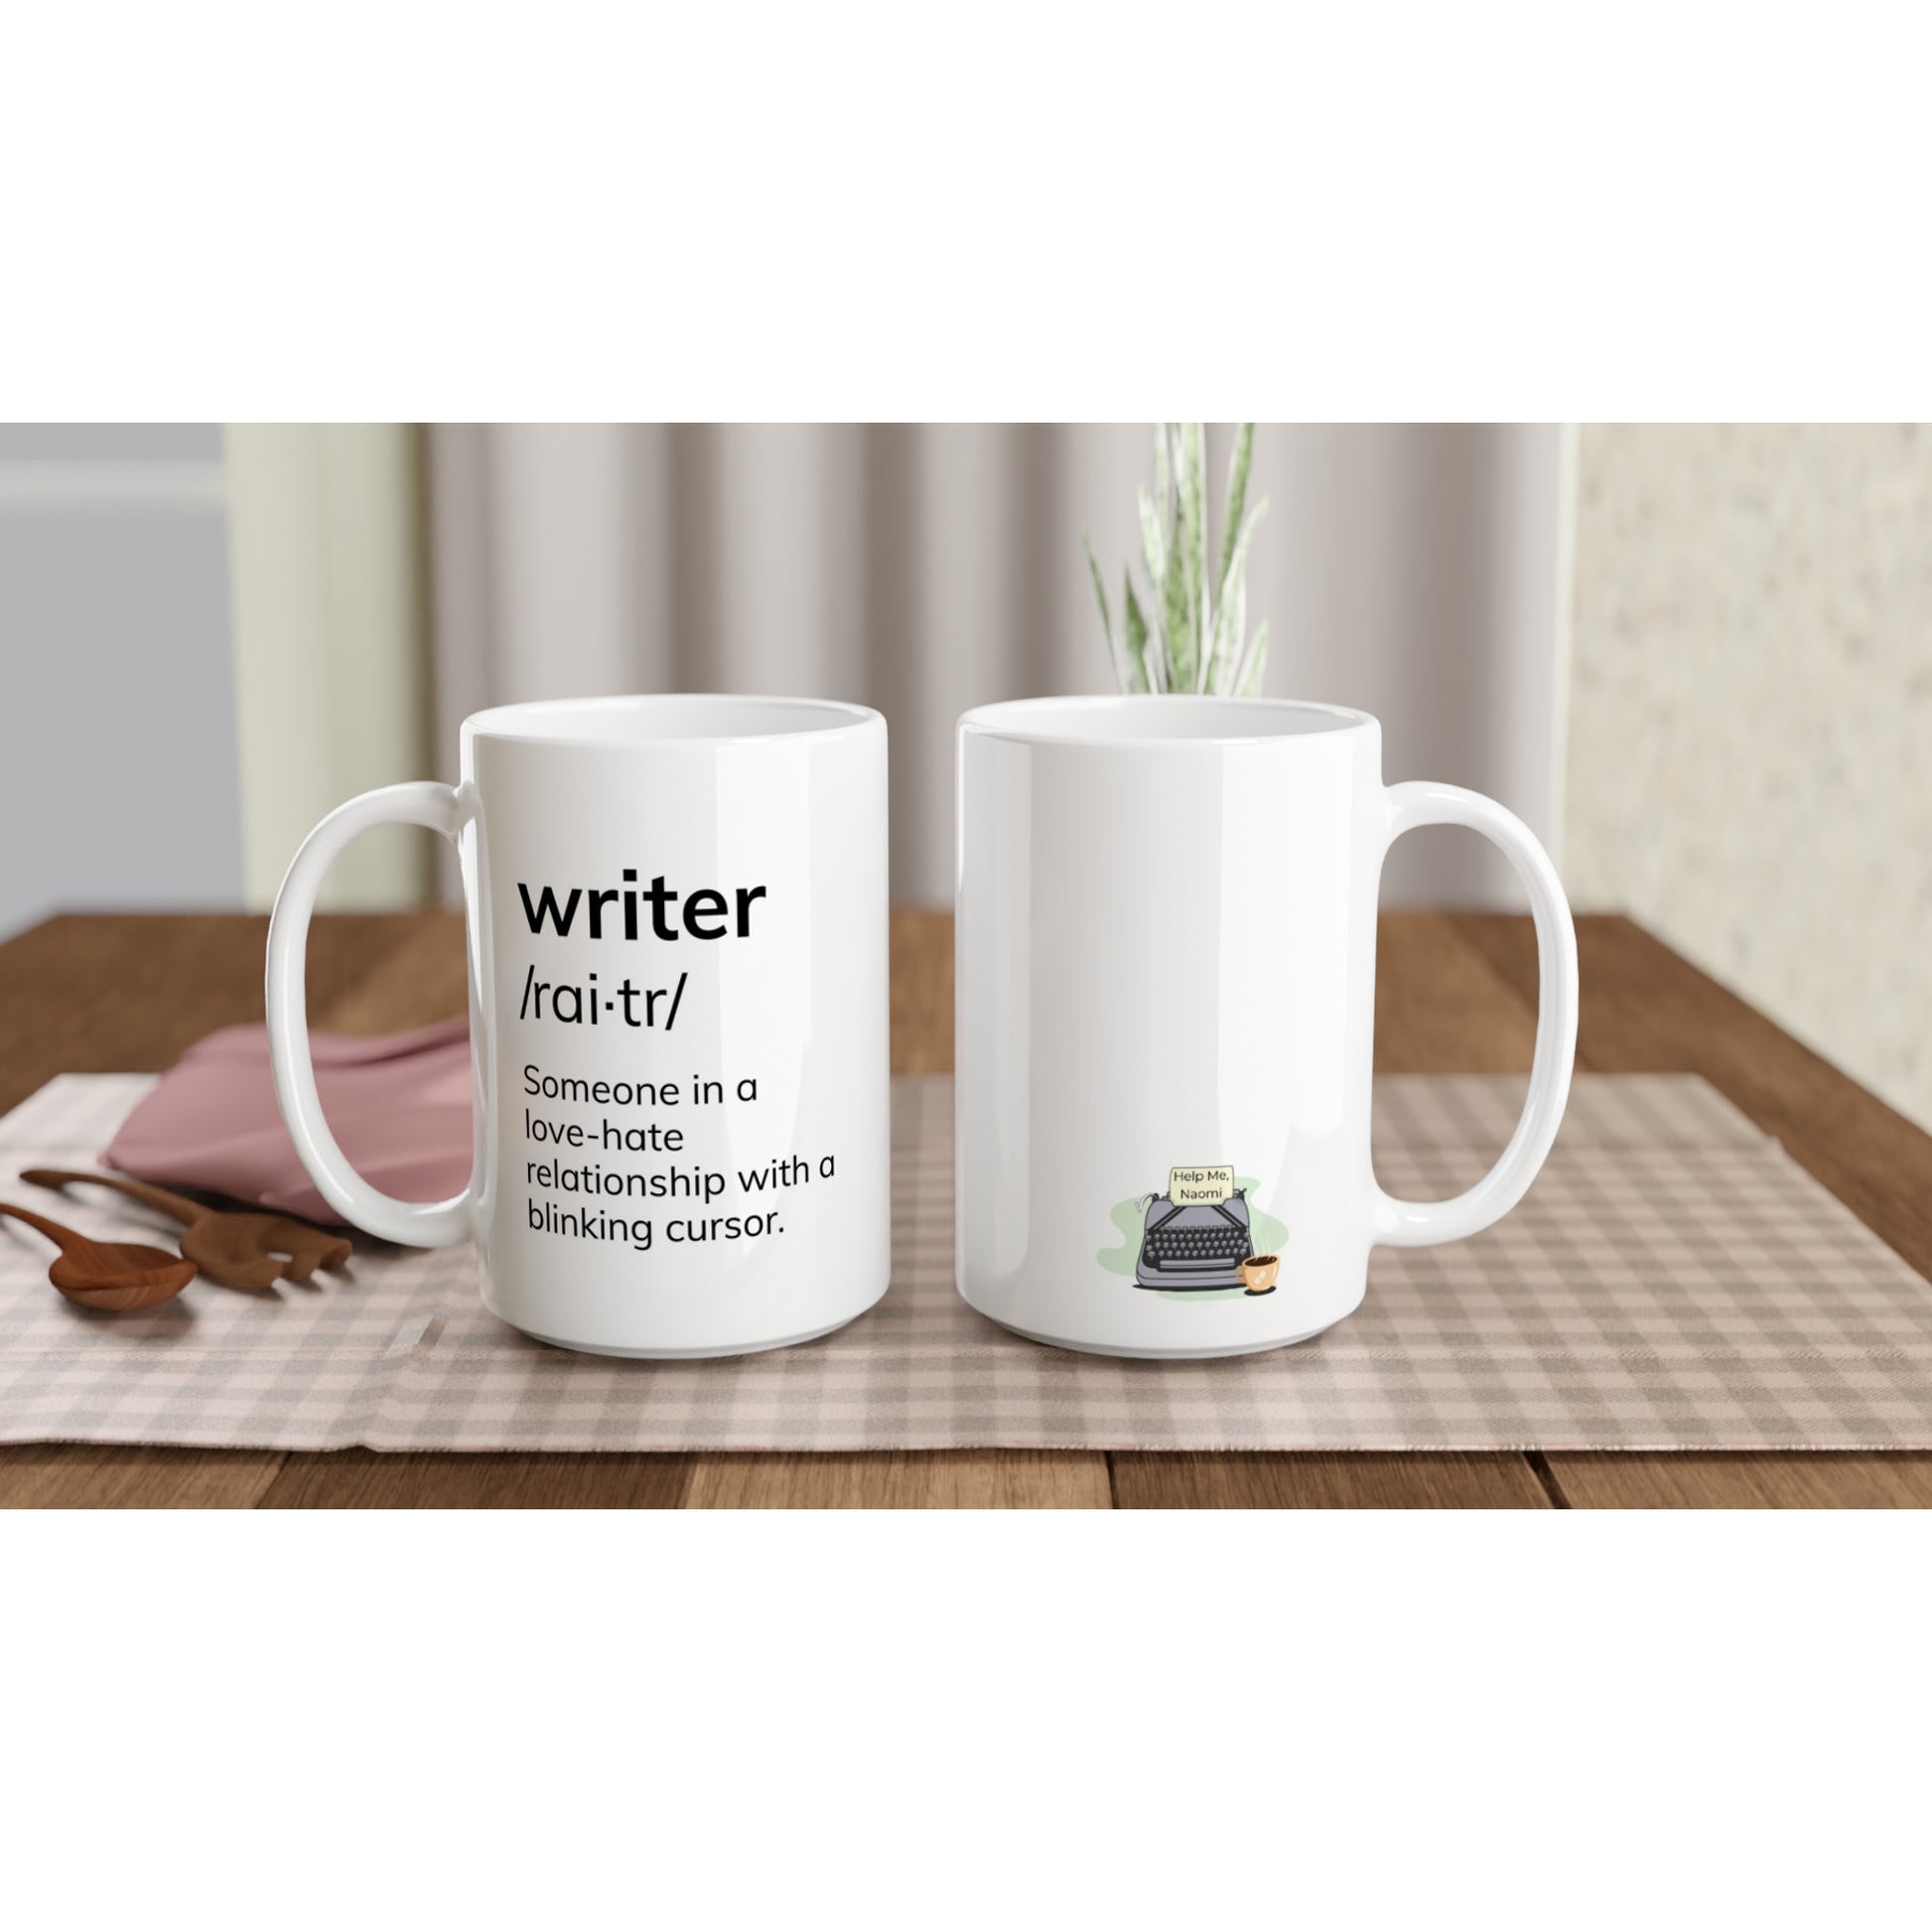 A white coffee mug with the product name "Writer: Someone in a love-hate relationship with a blinking cursor // Writing Themed Mug" on it.